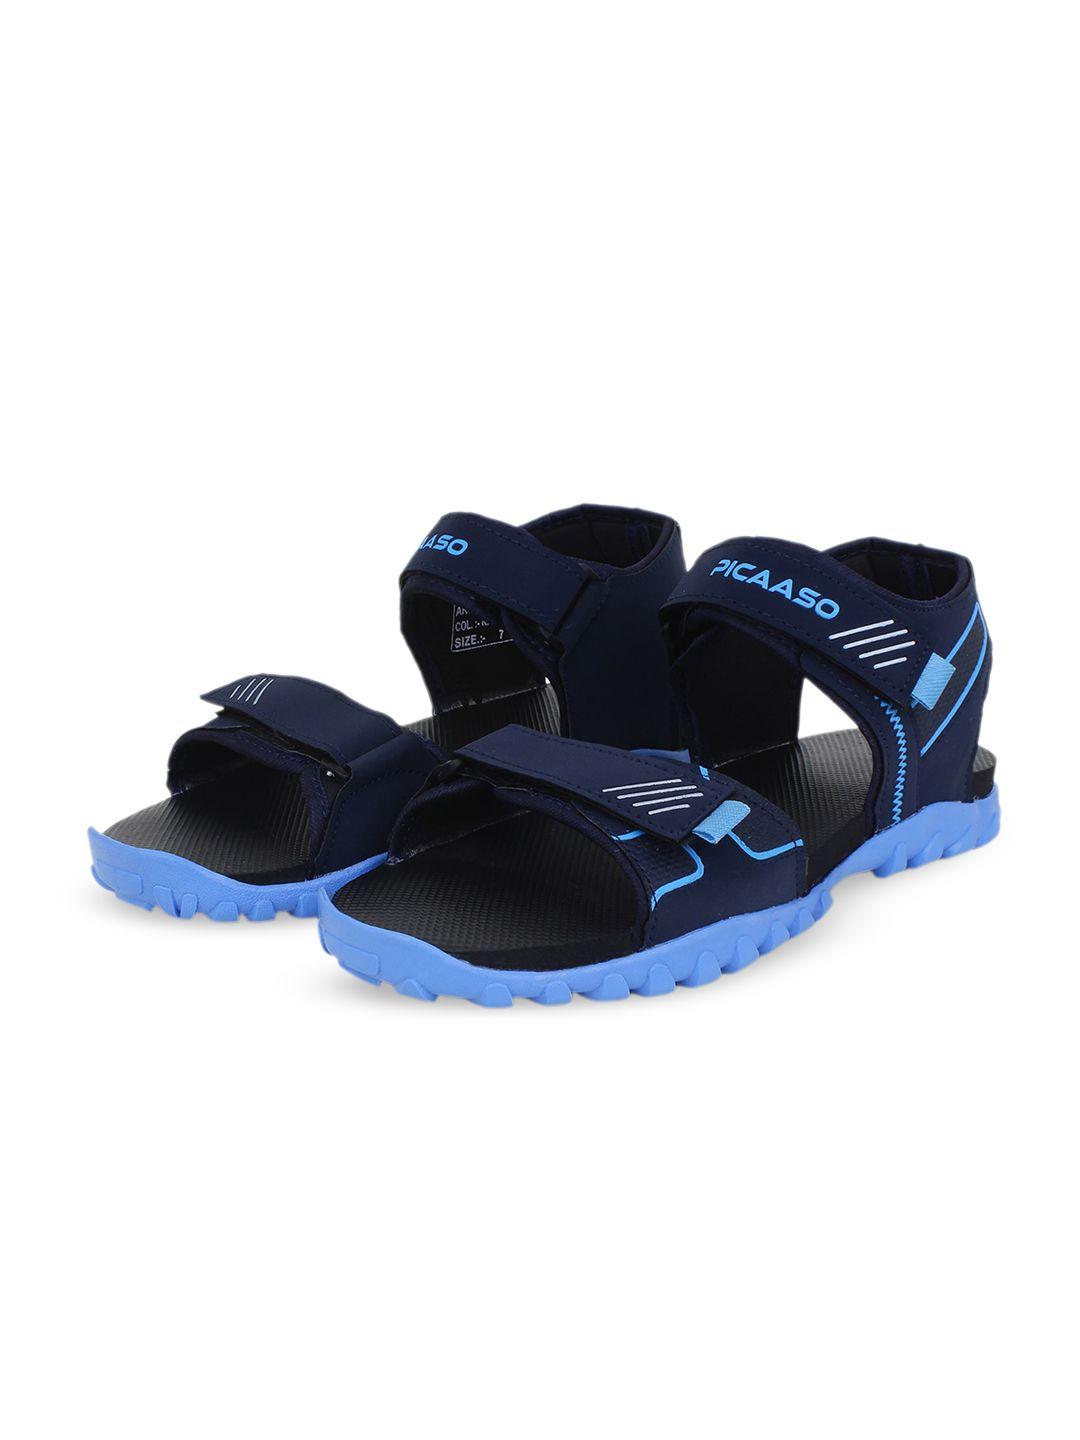 picaaso men textured sports sandals with velcro closure